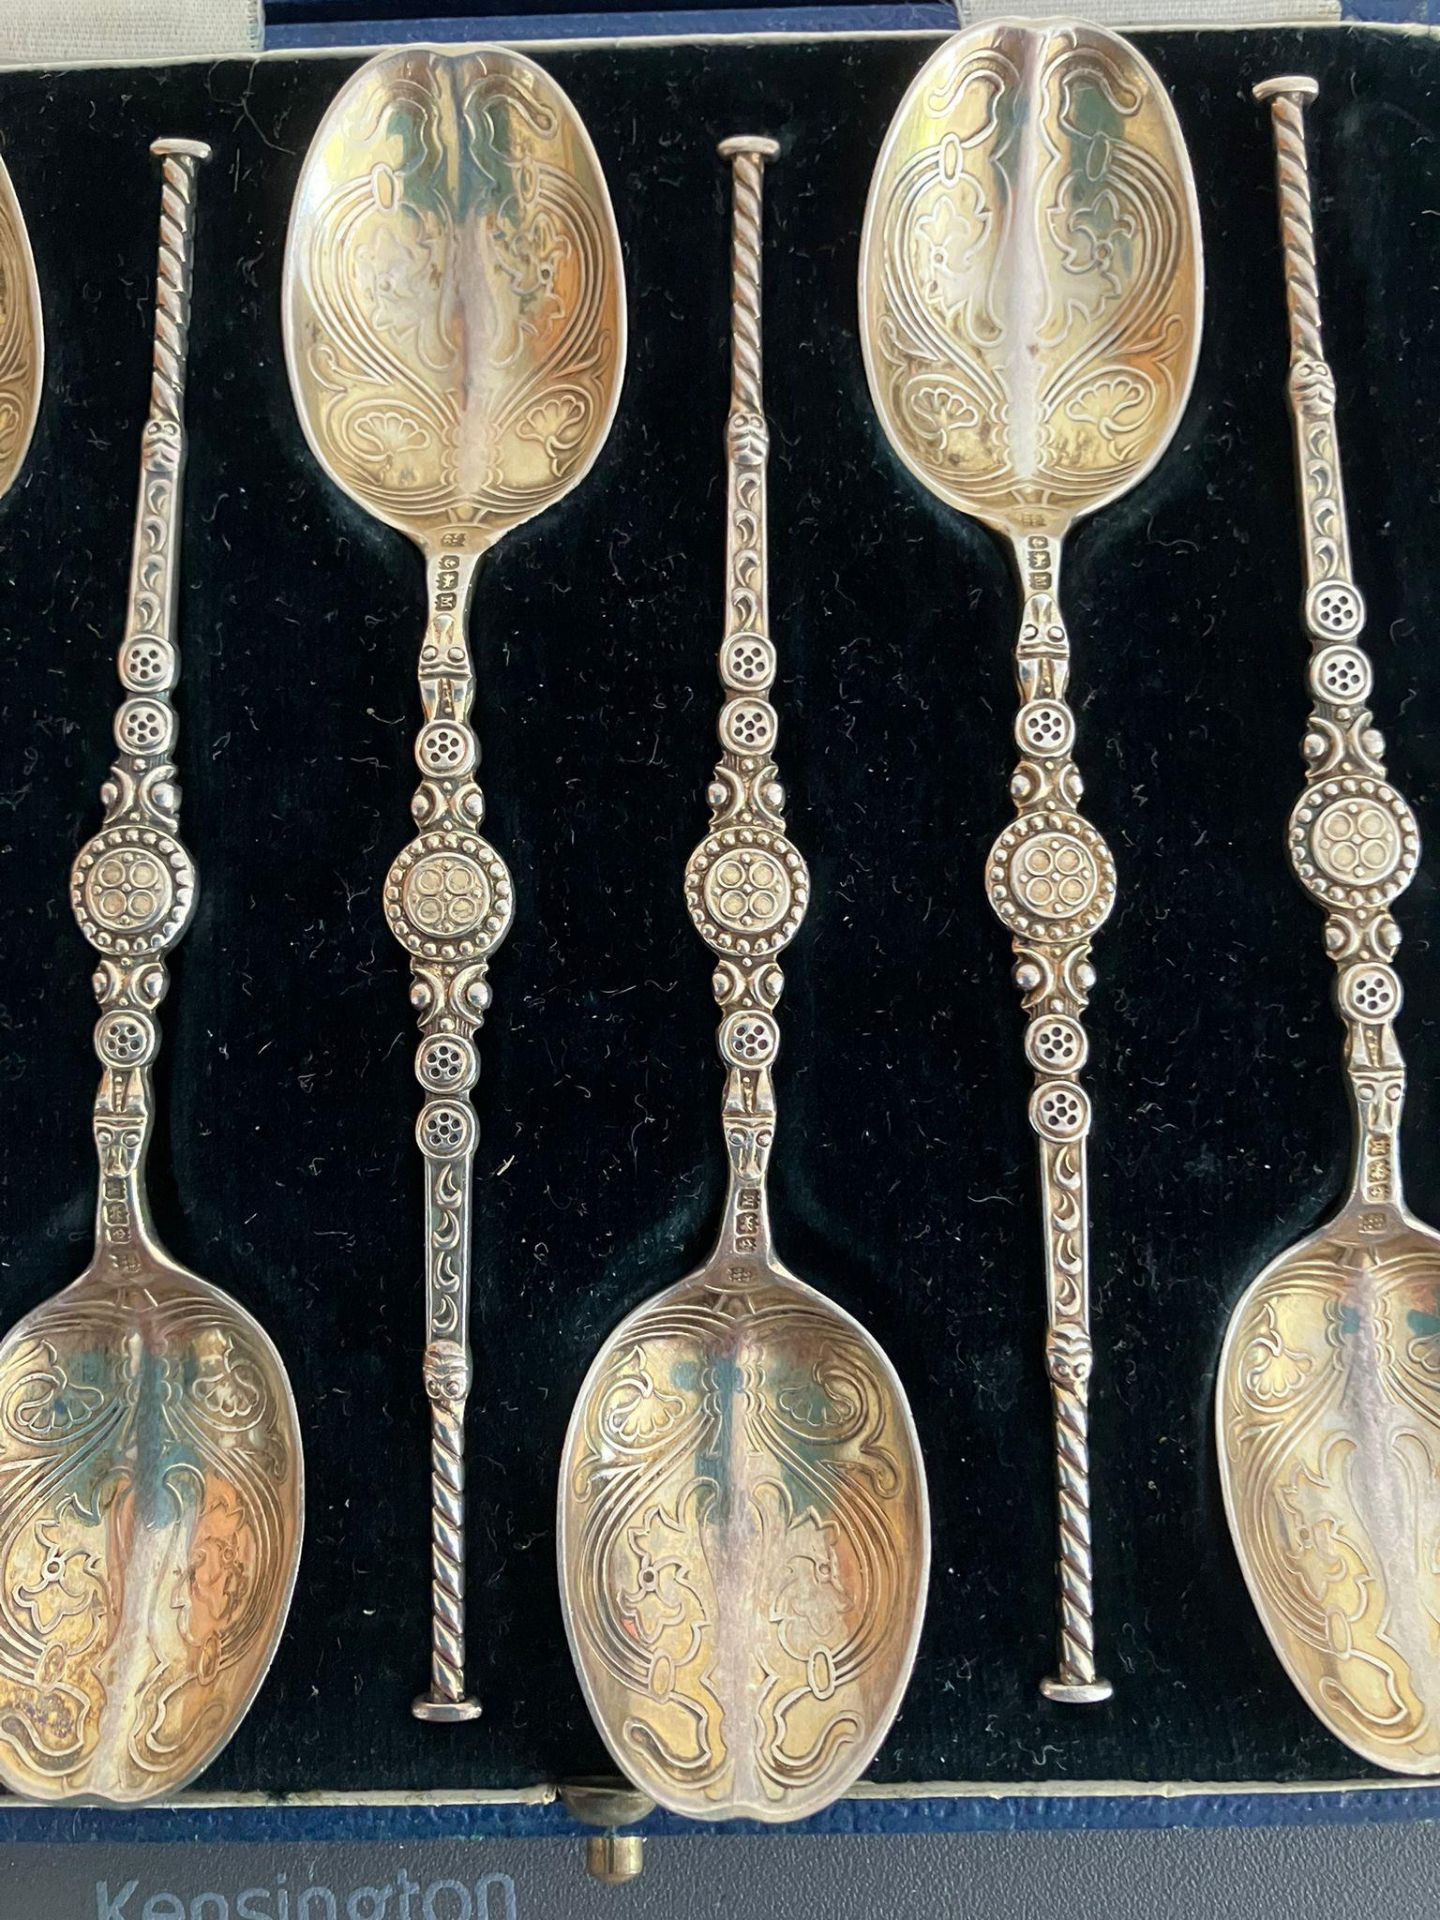 Rare Antique set of six gilded SILVER ANOINTING TEASPOONS. Clear hallmark for Charles S Green, - Image 5 of 5